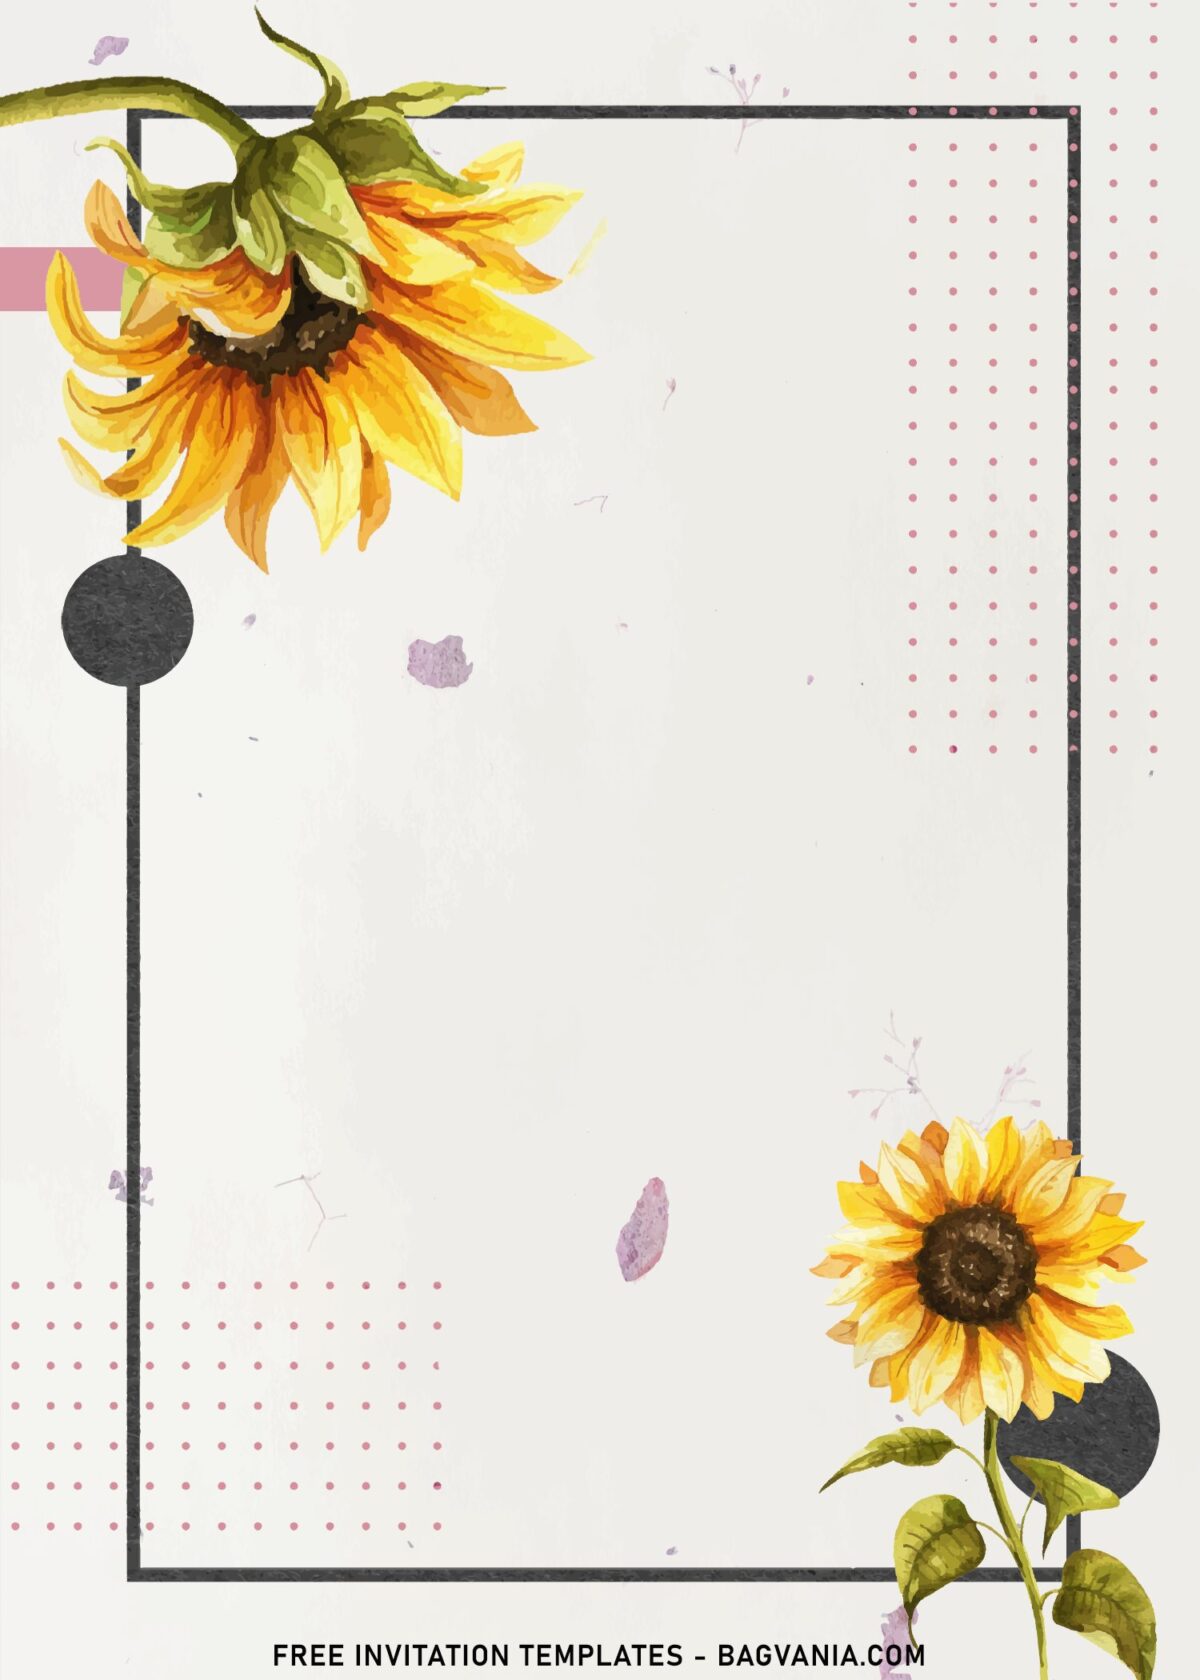 8+ Gorgeous Watercolor Cross Pattern With Sunflower Invitation Templates with rustic background